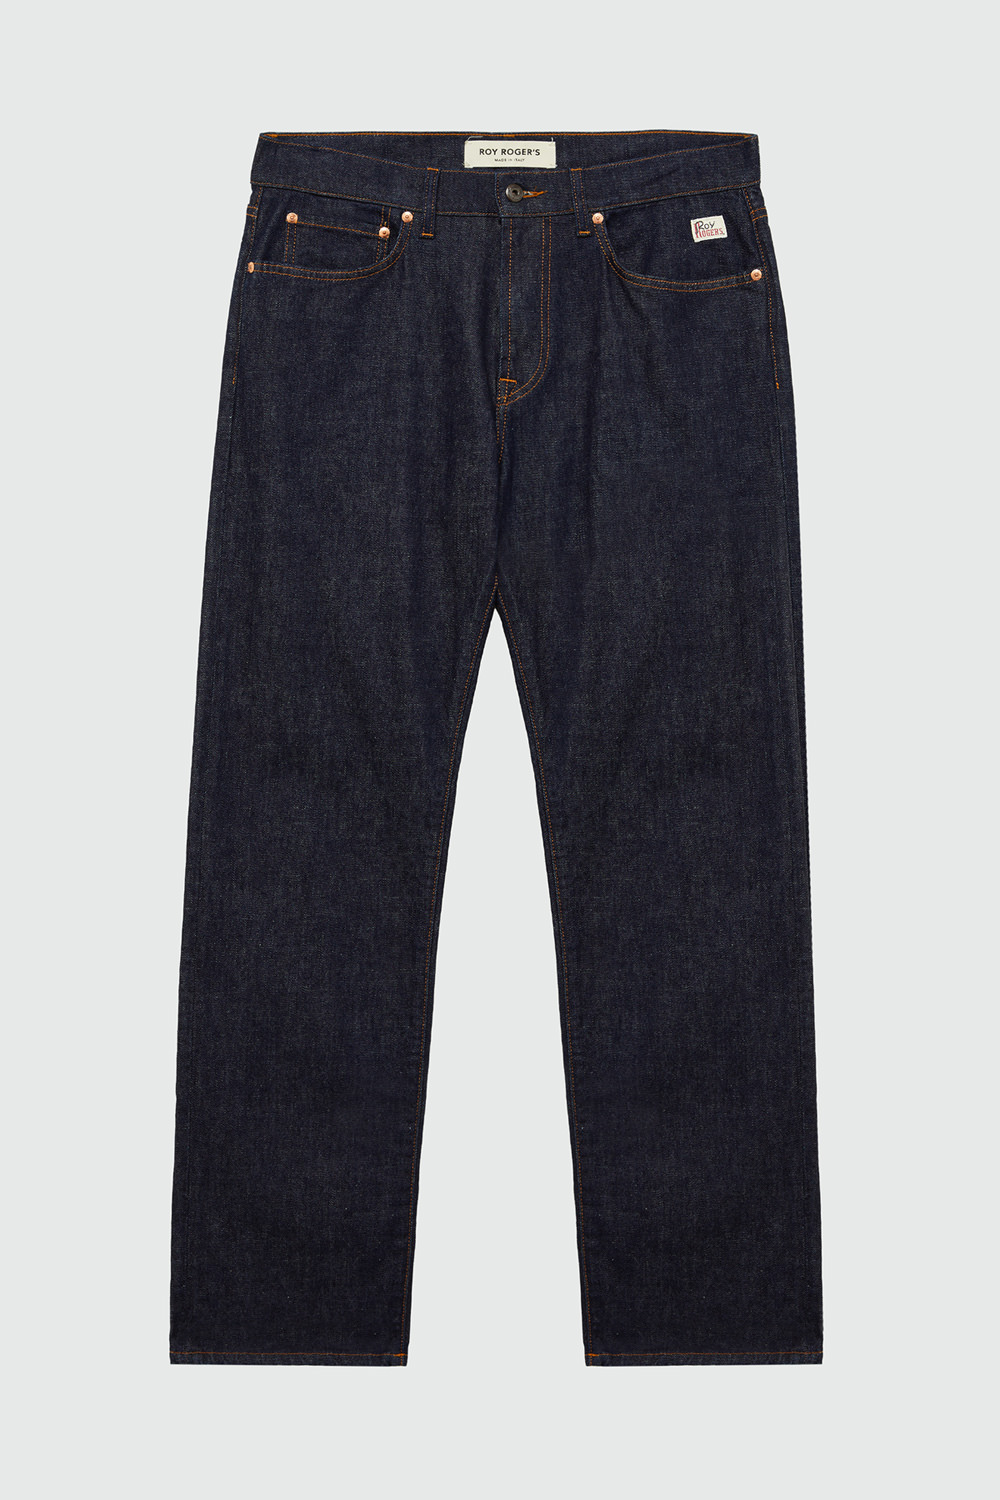 ROY ROGERS: JEANS CULT RINSE